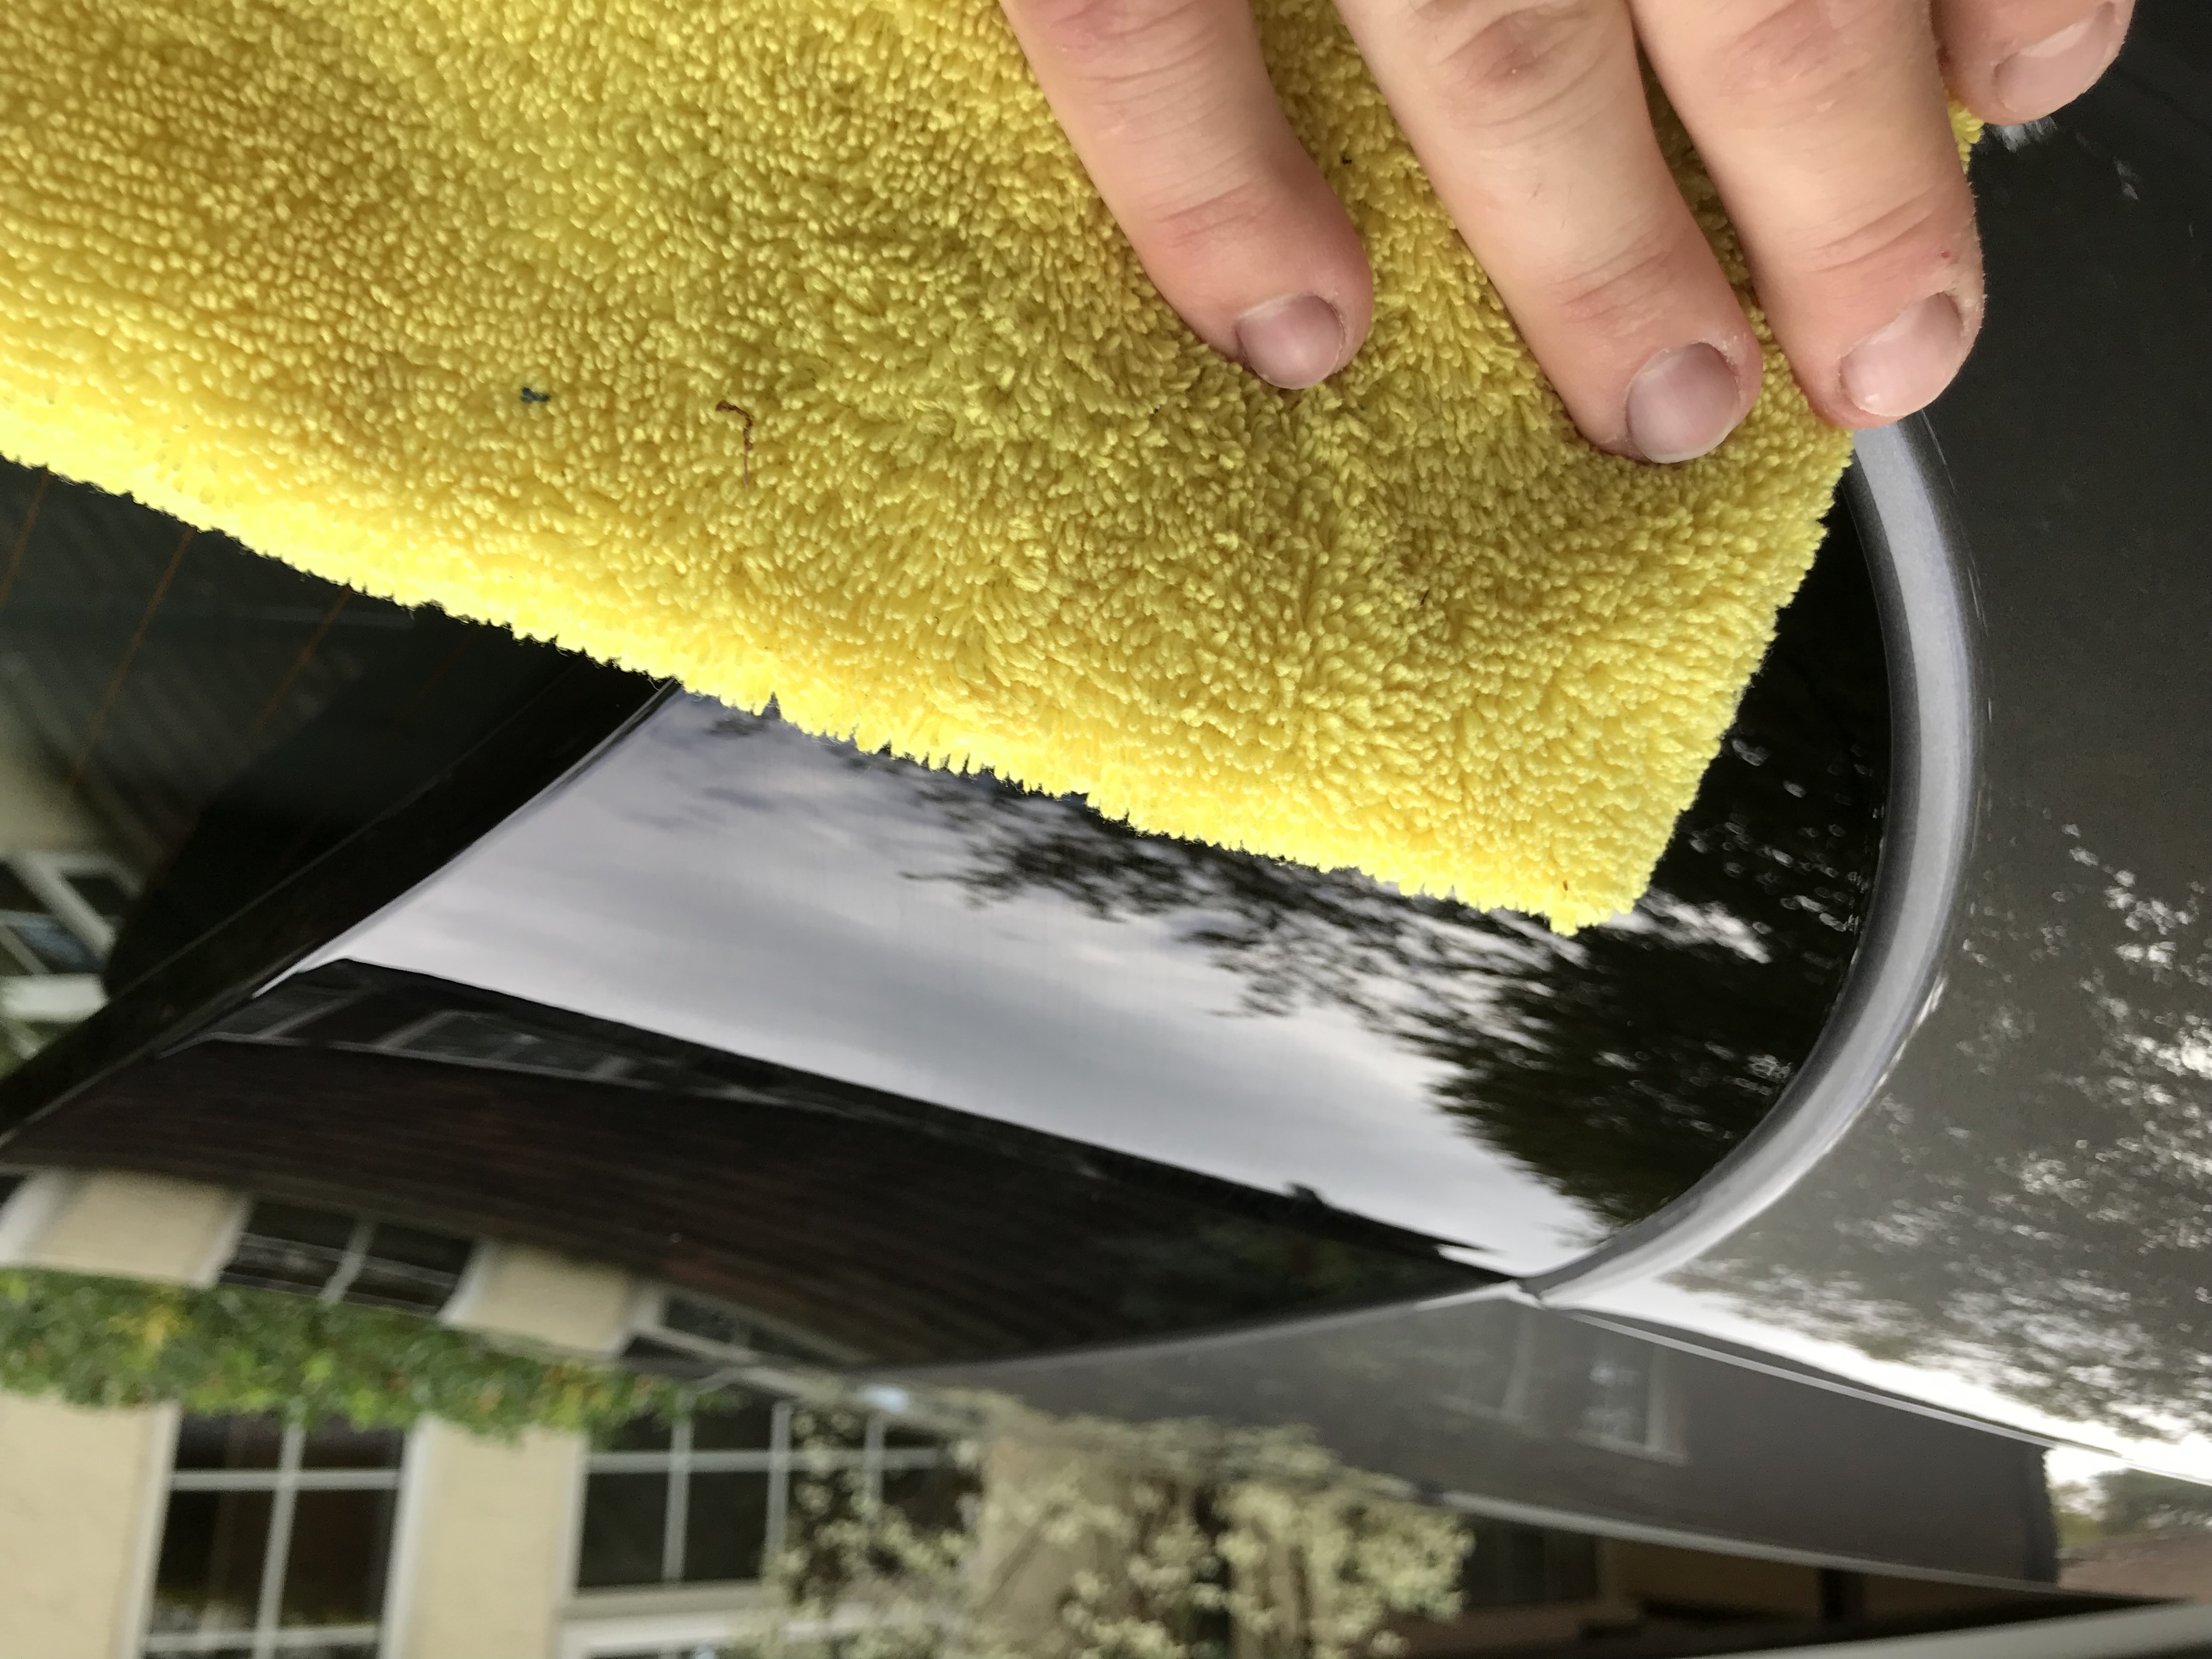 How To Clean A Ceramic Coated Car All That Gleams